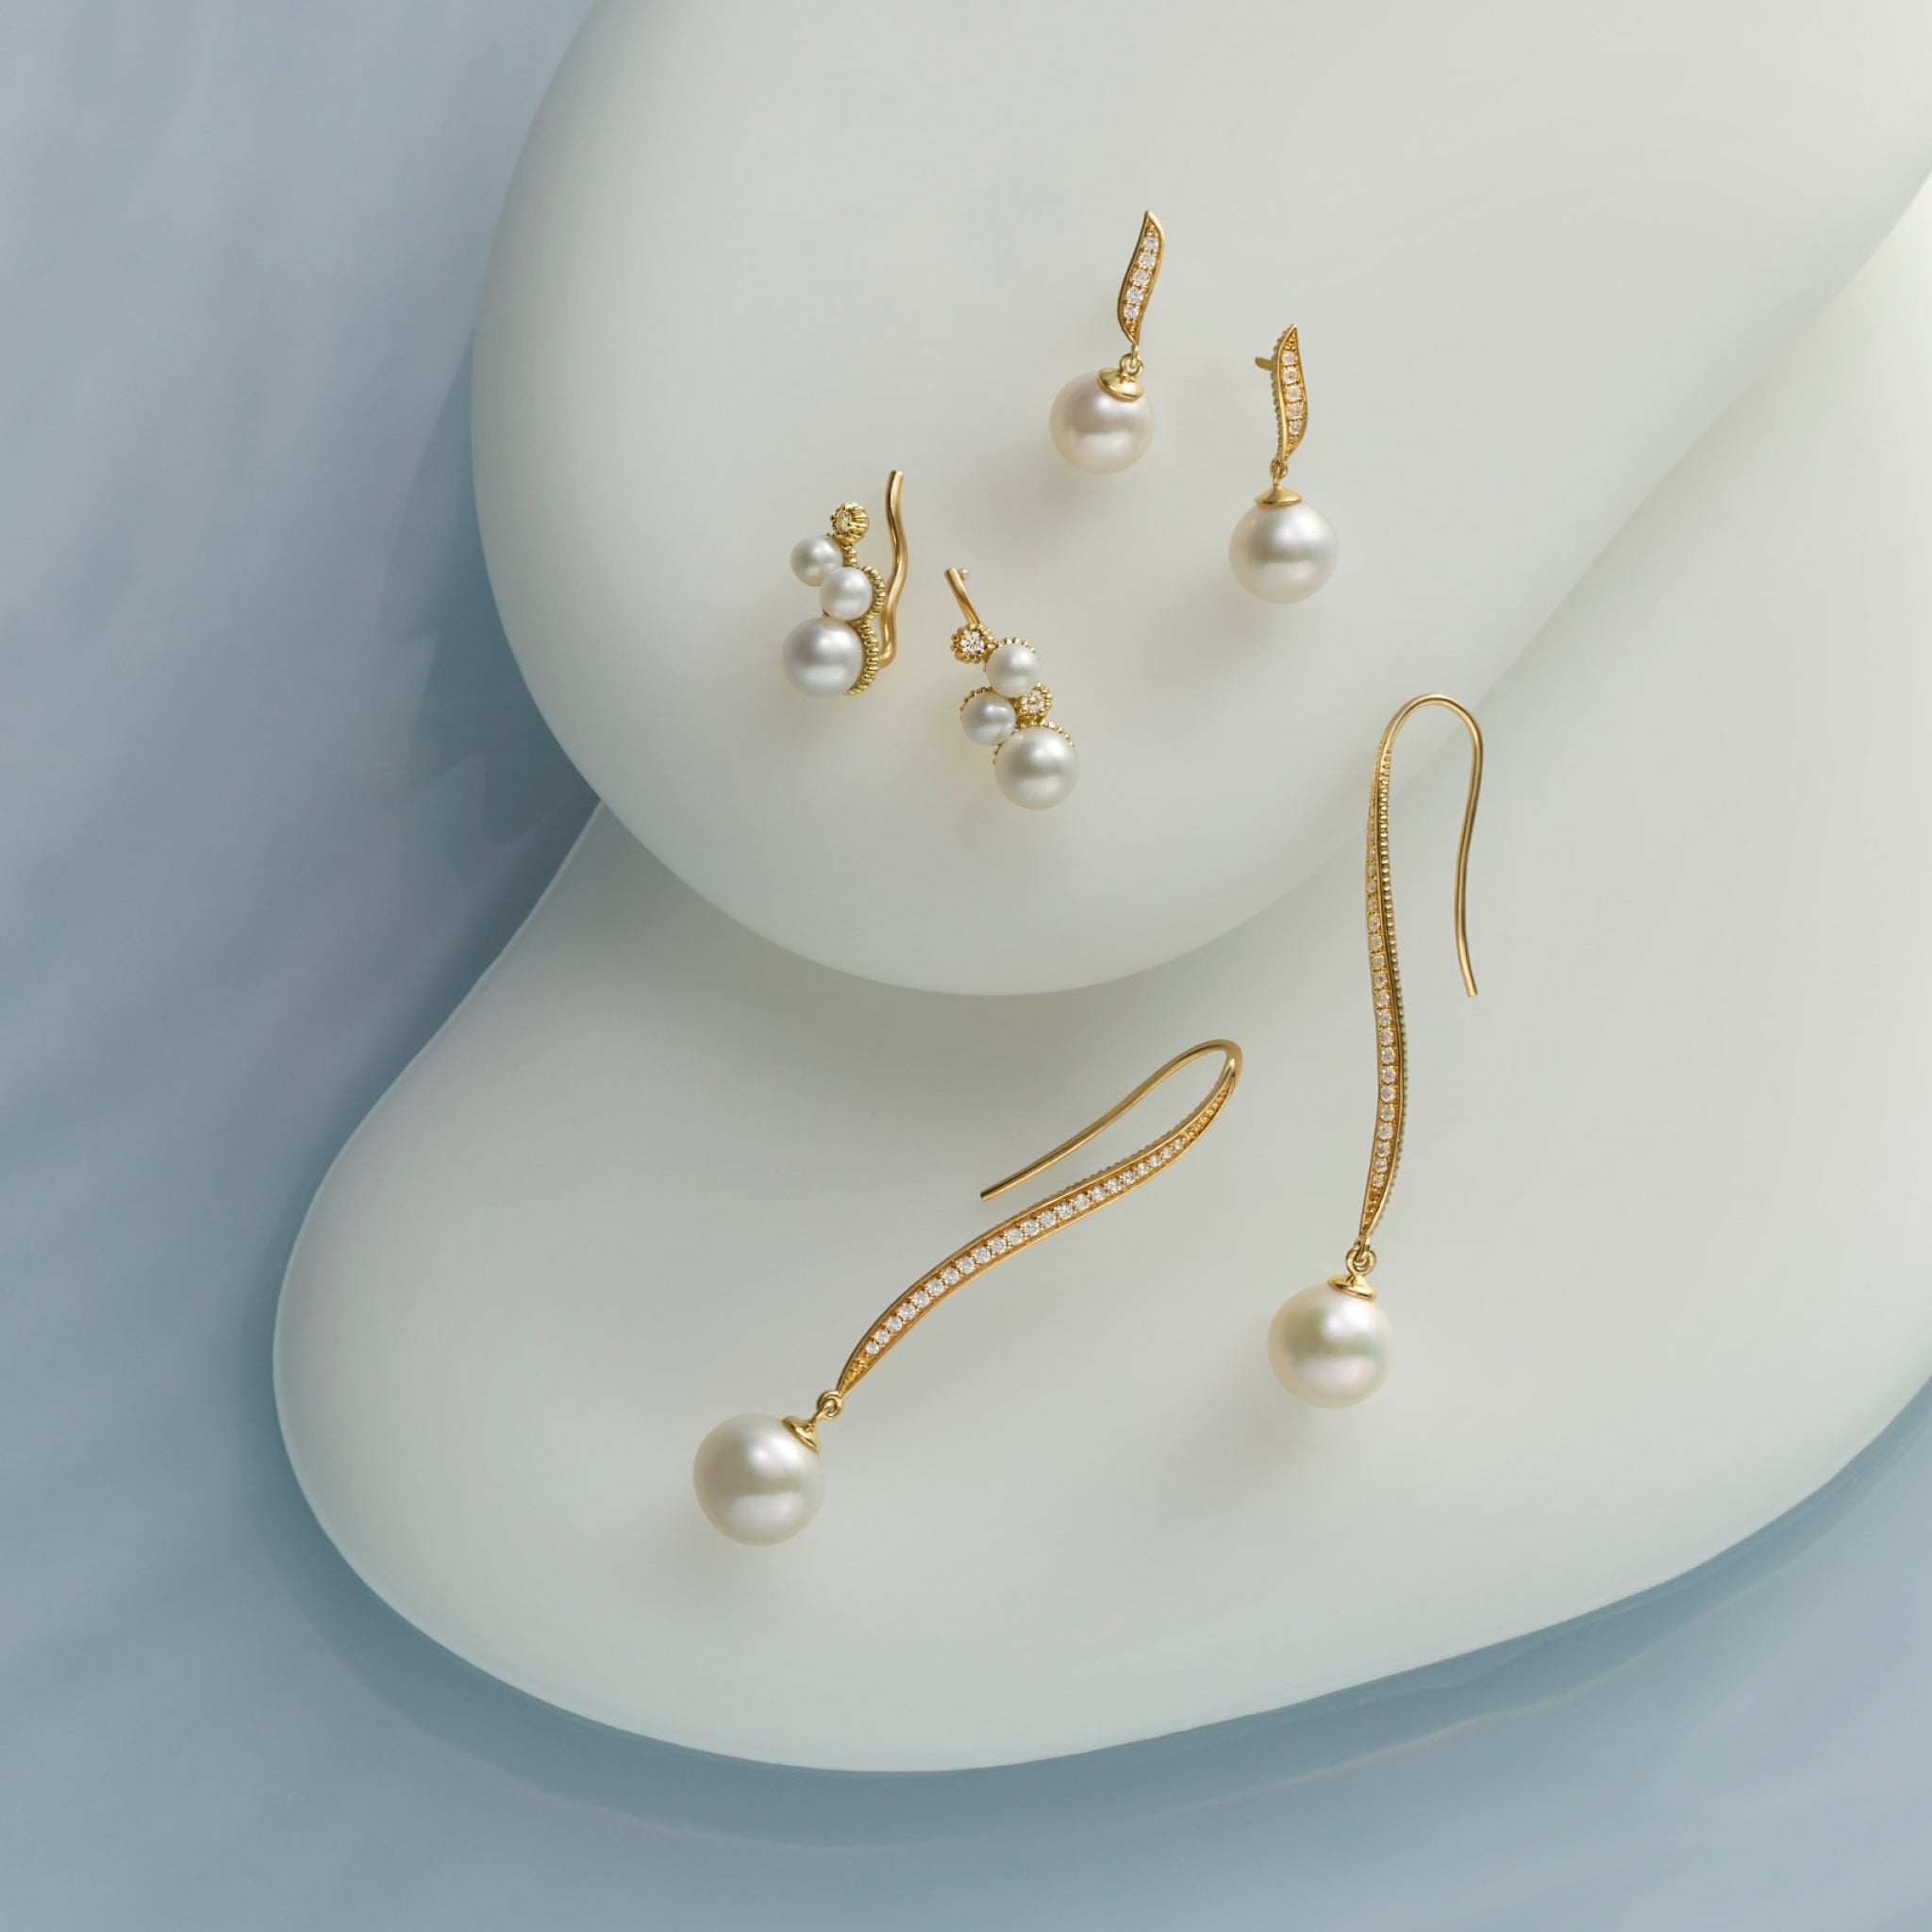 Shima Long Drop Earrings with Freshwater Pearls and Diamonds in 18K